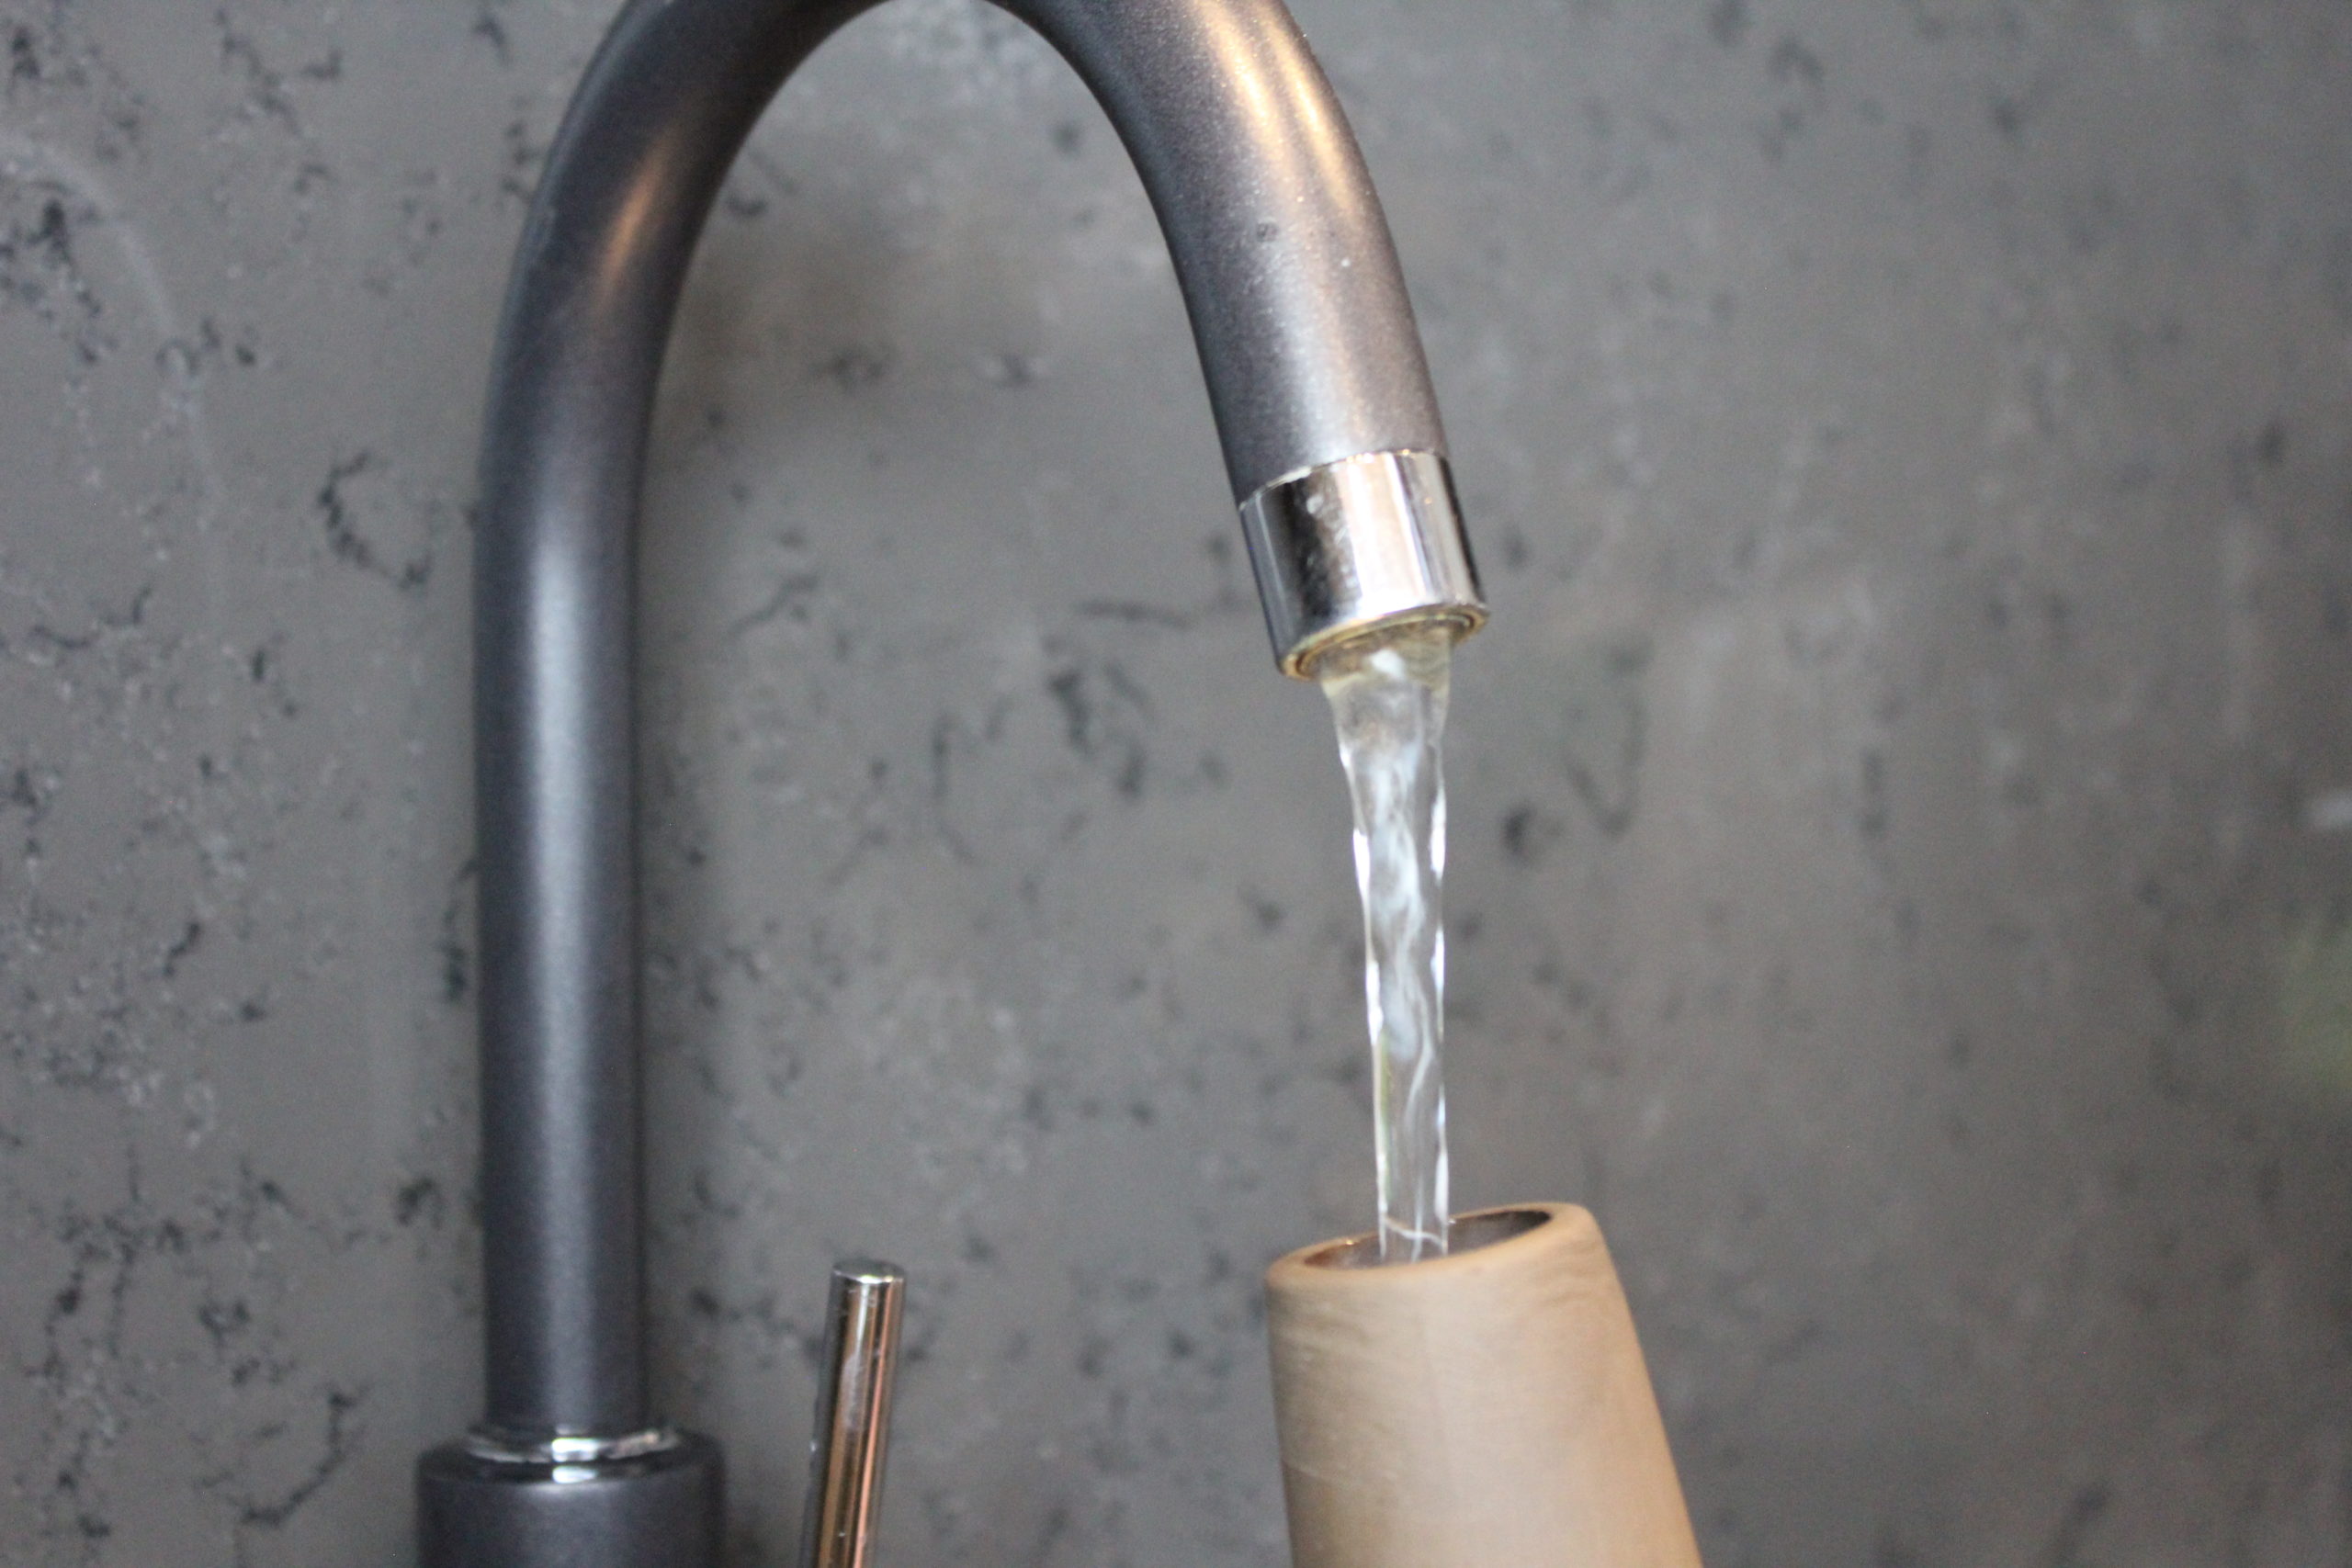 Image shows a Jarra carafe being filled with water.